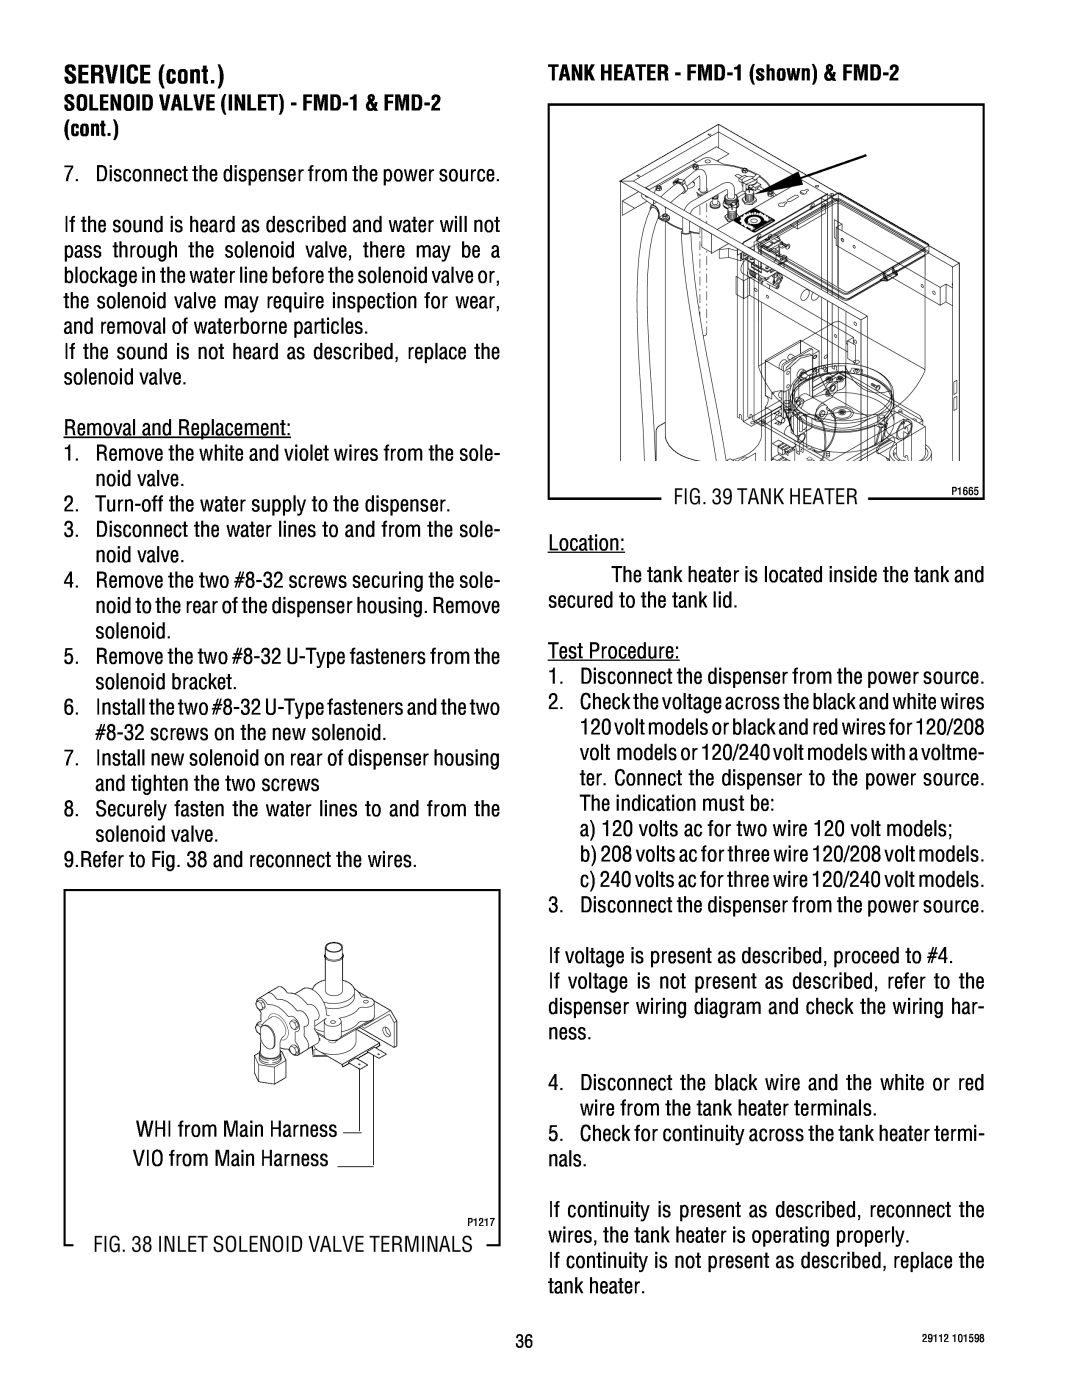 Bunn service manual SOLENOID VALVE INLET - FMD-1& FMD-2cont, Tank Heater, SERVICE cont, Location 